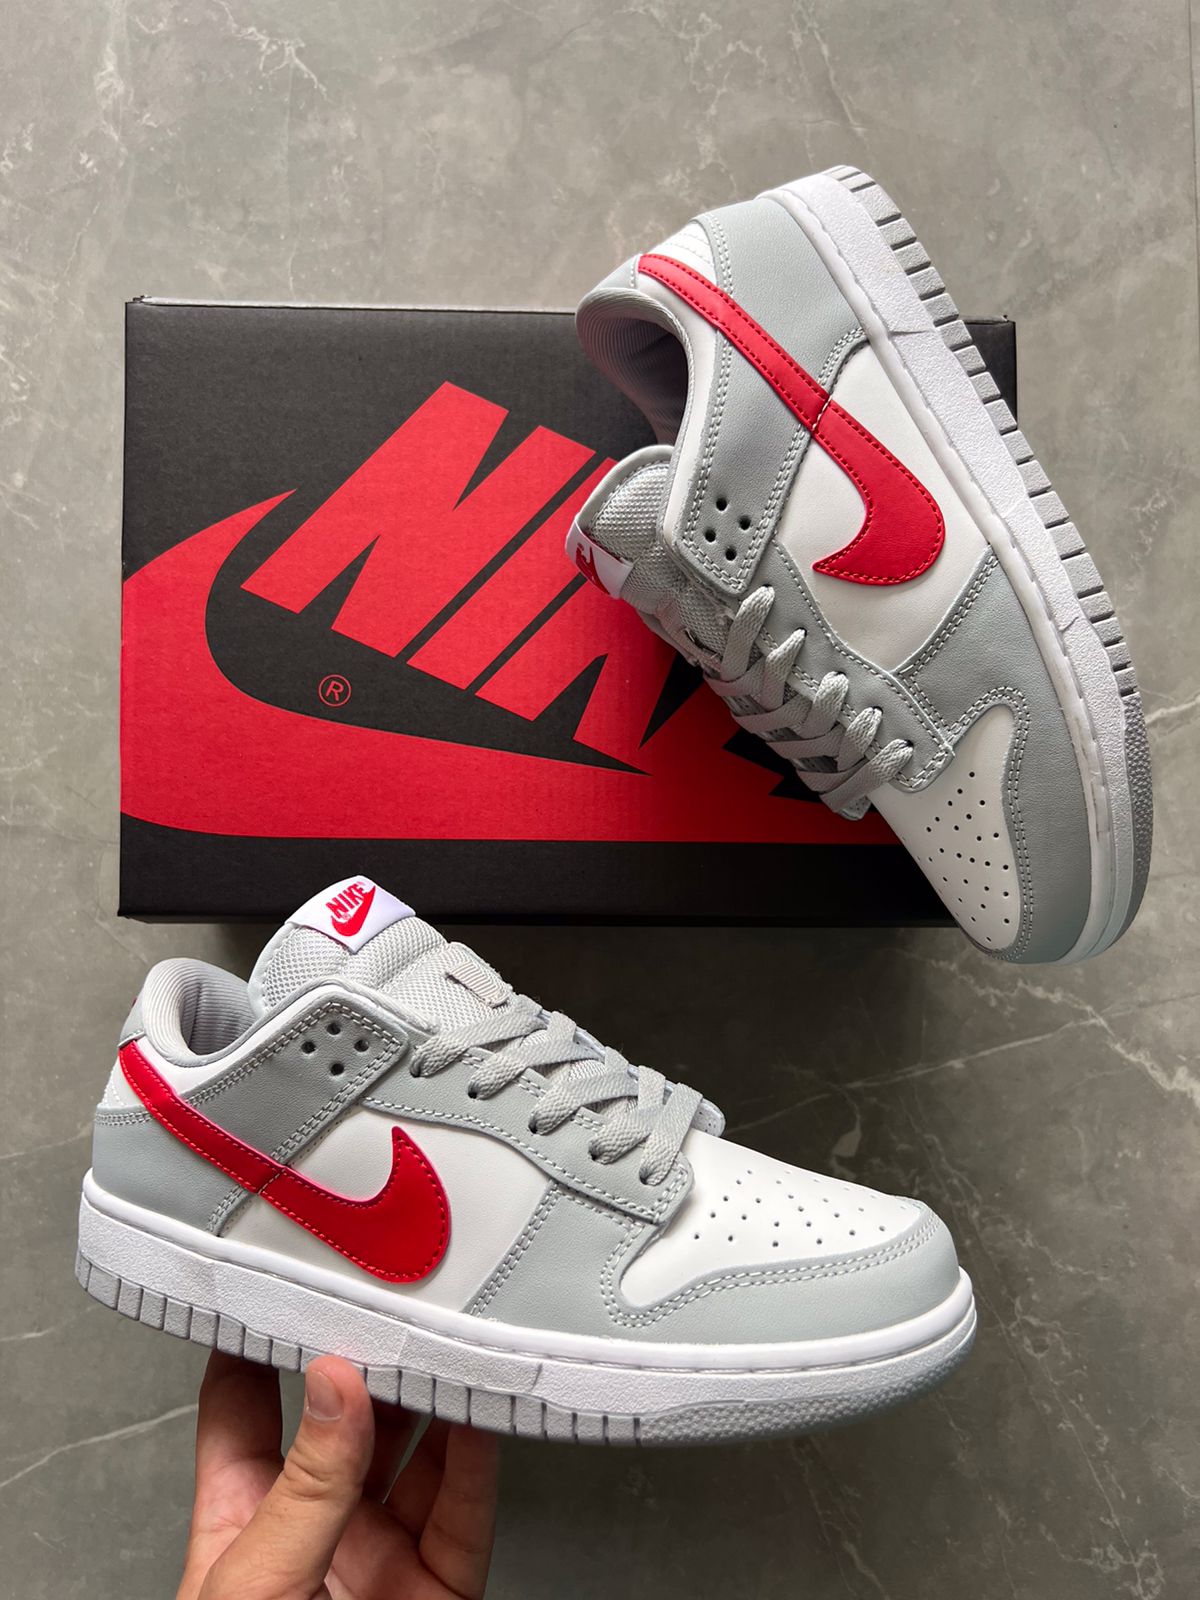 SB Dunk White Grey Red Sneakers For Boys